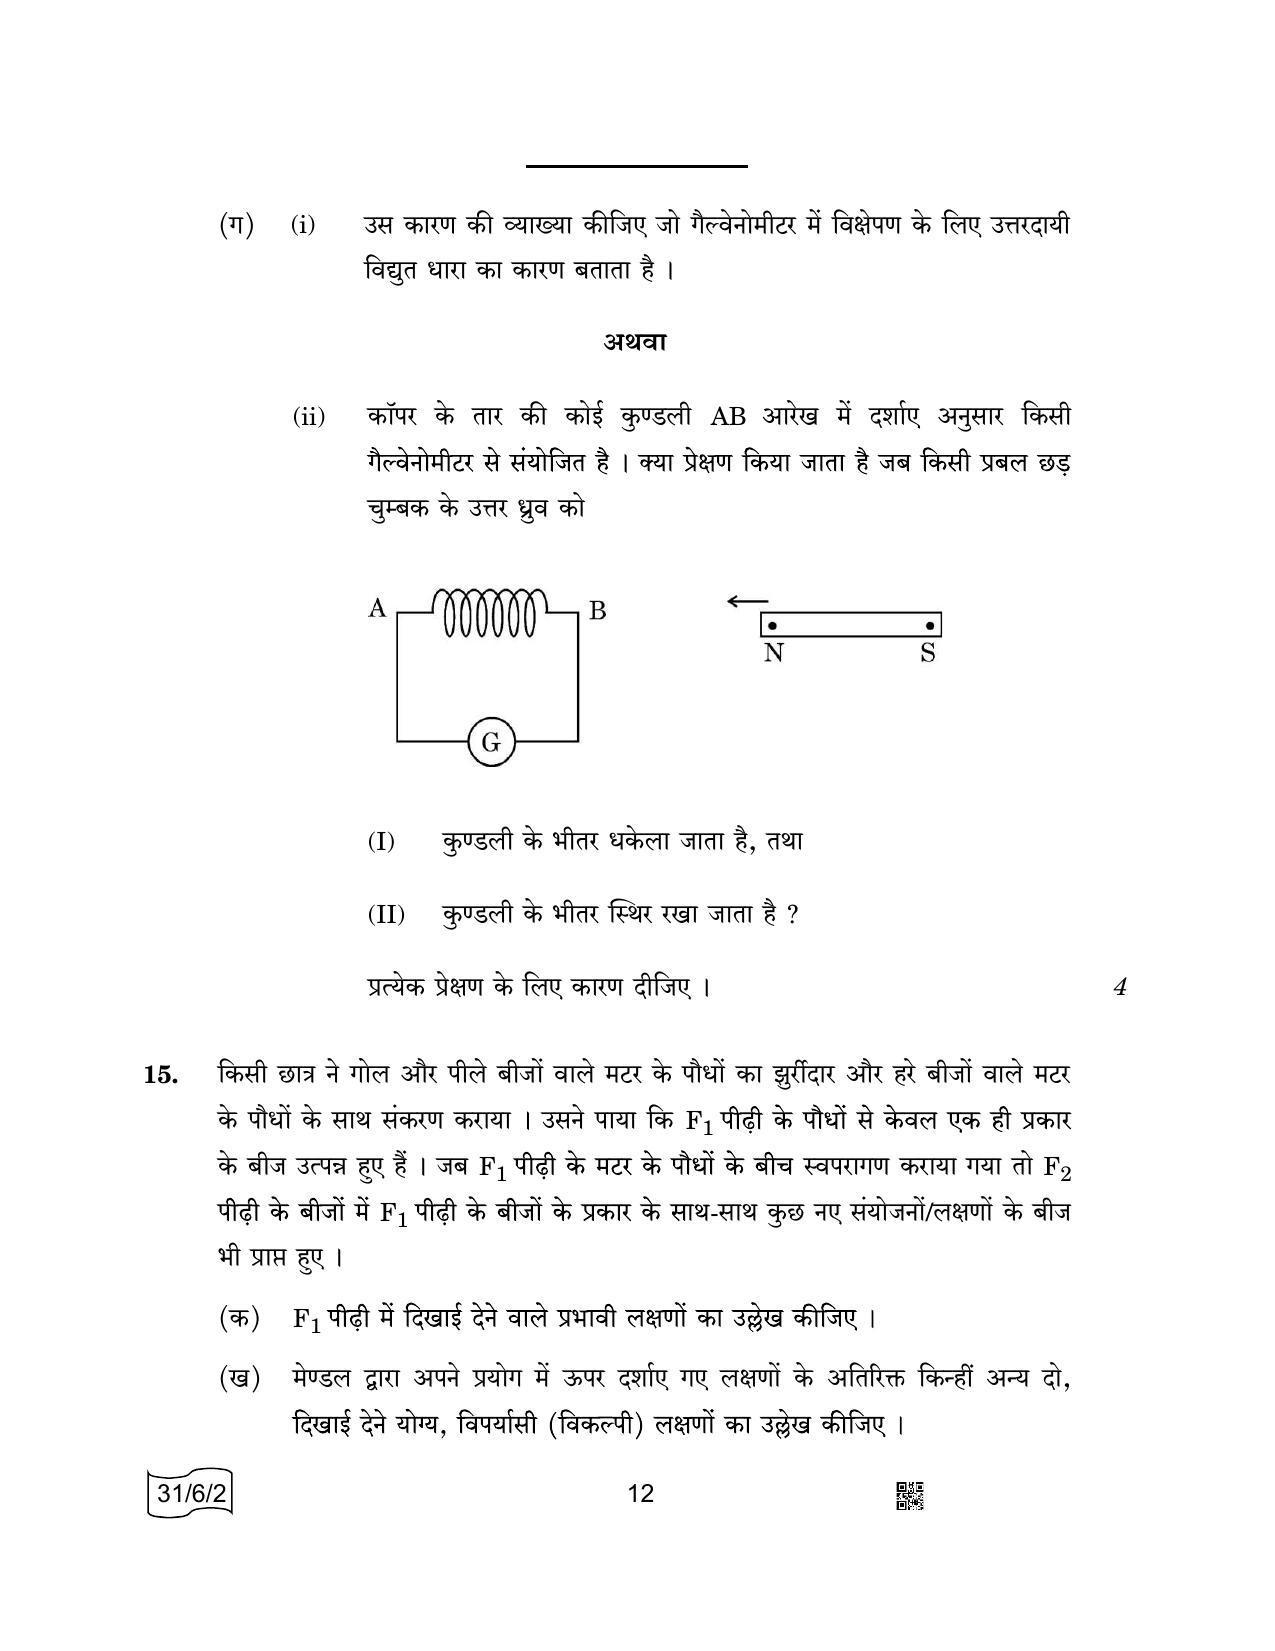 CBSE Class 10 31-6-2 SCIENCE 2022 Compartment Question Paper - Page 12